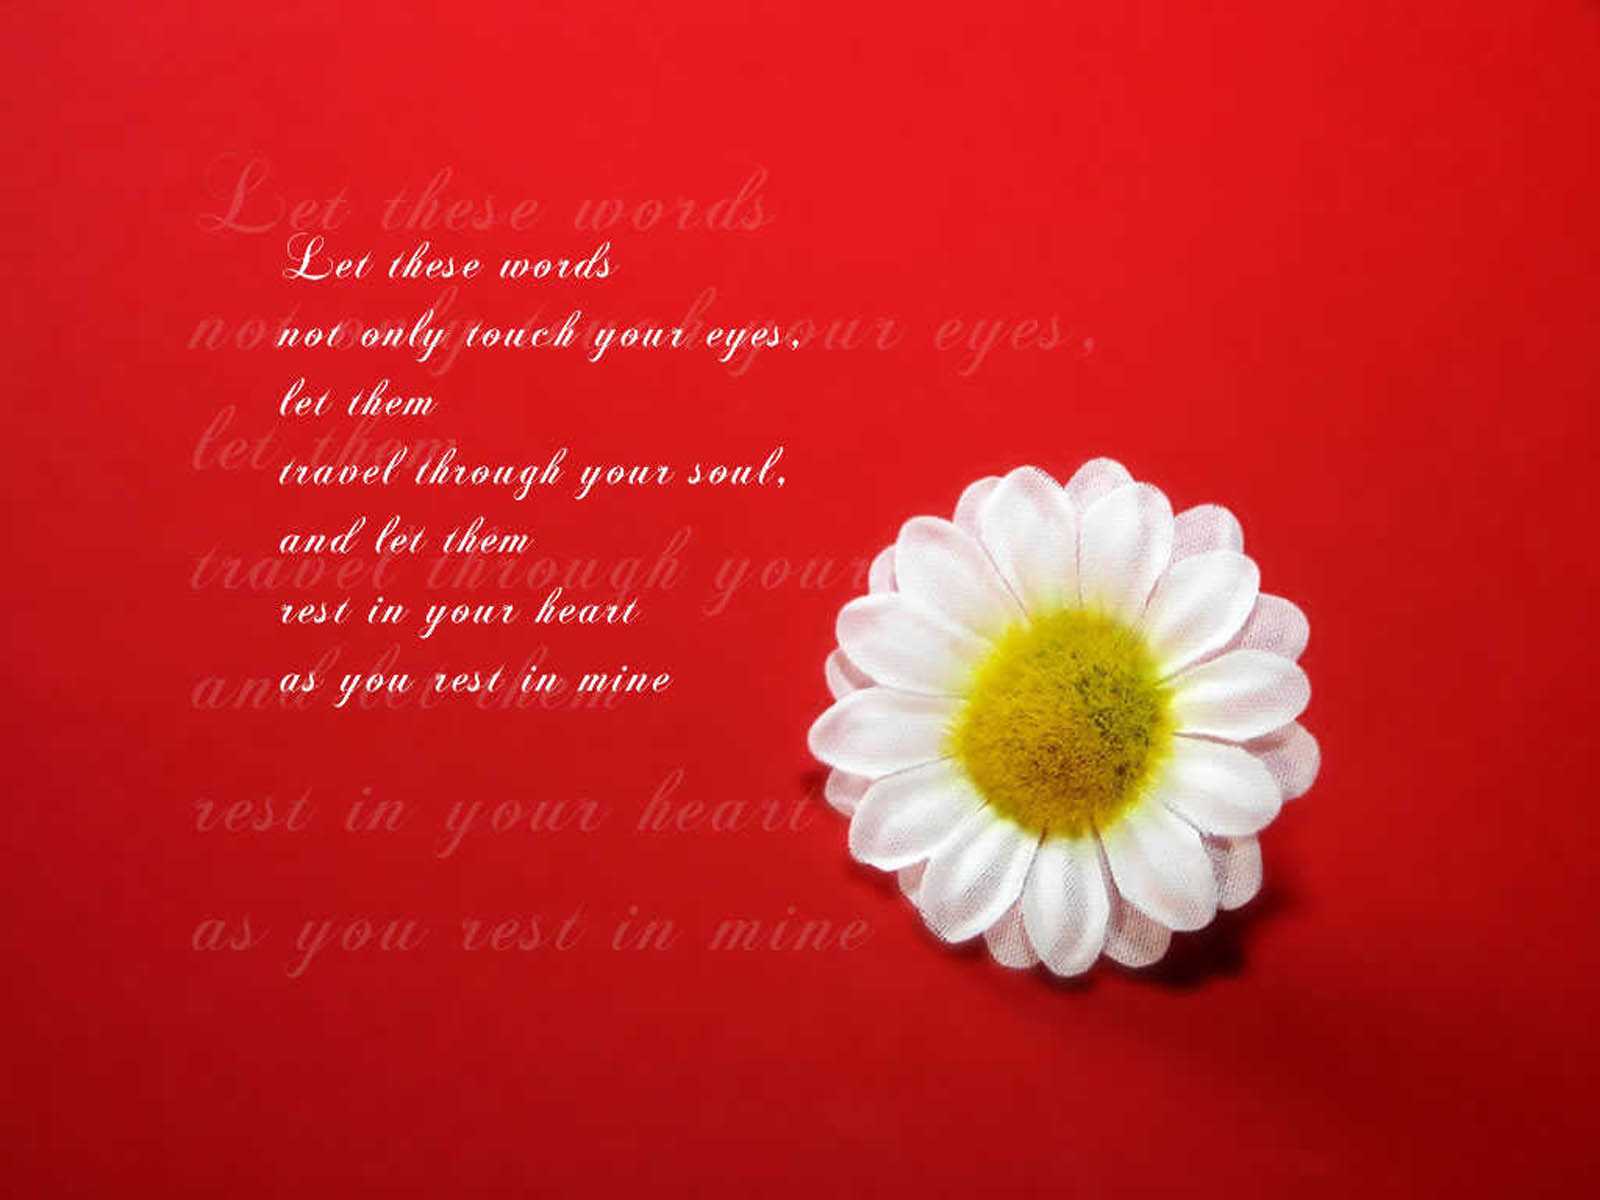 Tag Love Quotes Wallpapers BackgroundsPhotos Images and Pictures